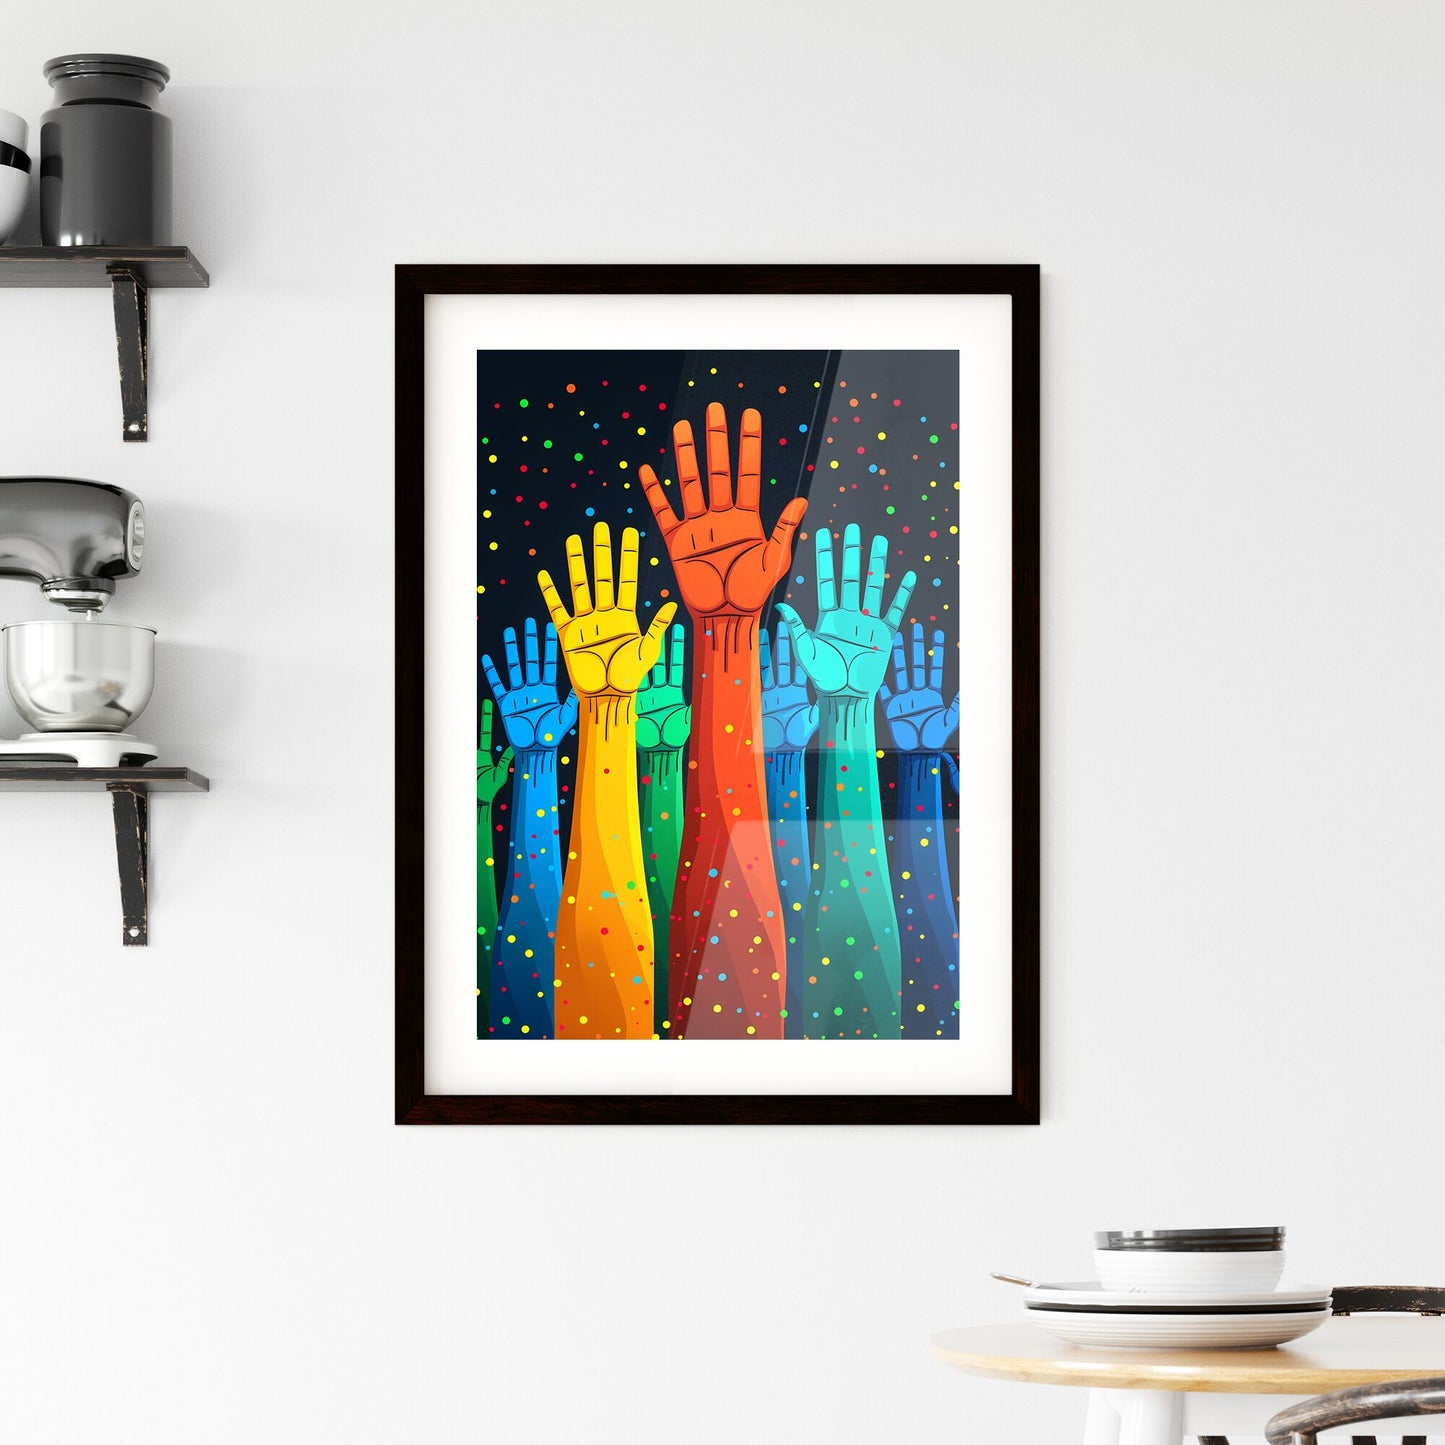 Colorful raised hands painting for Friendship Day celebration with a focus on art Default Title